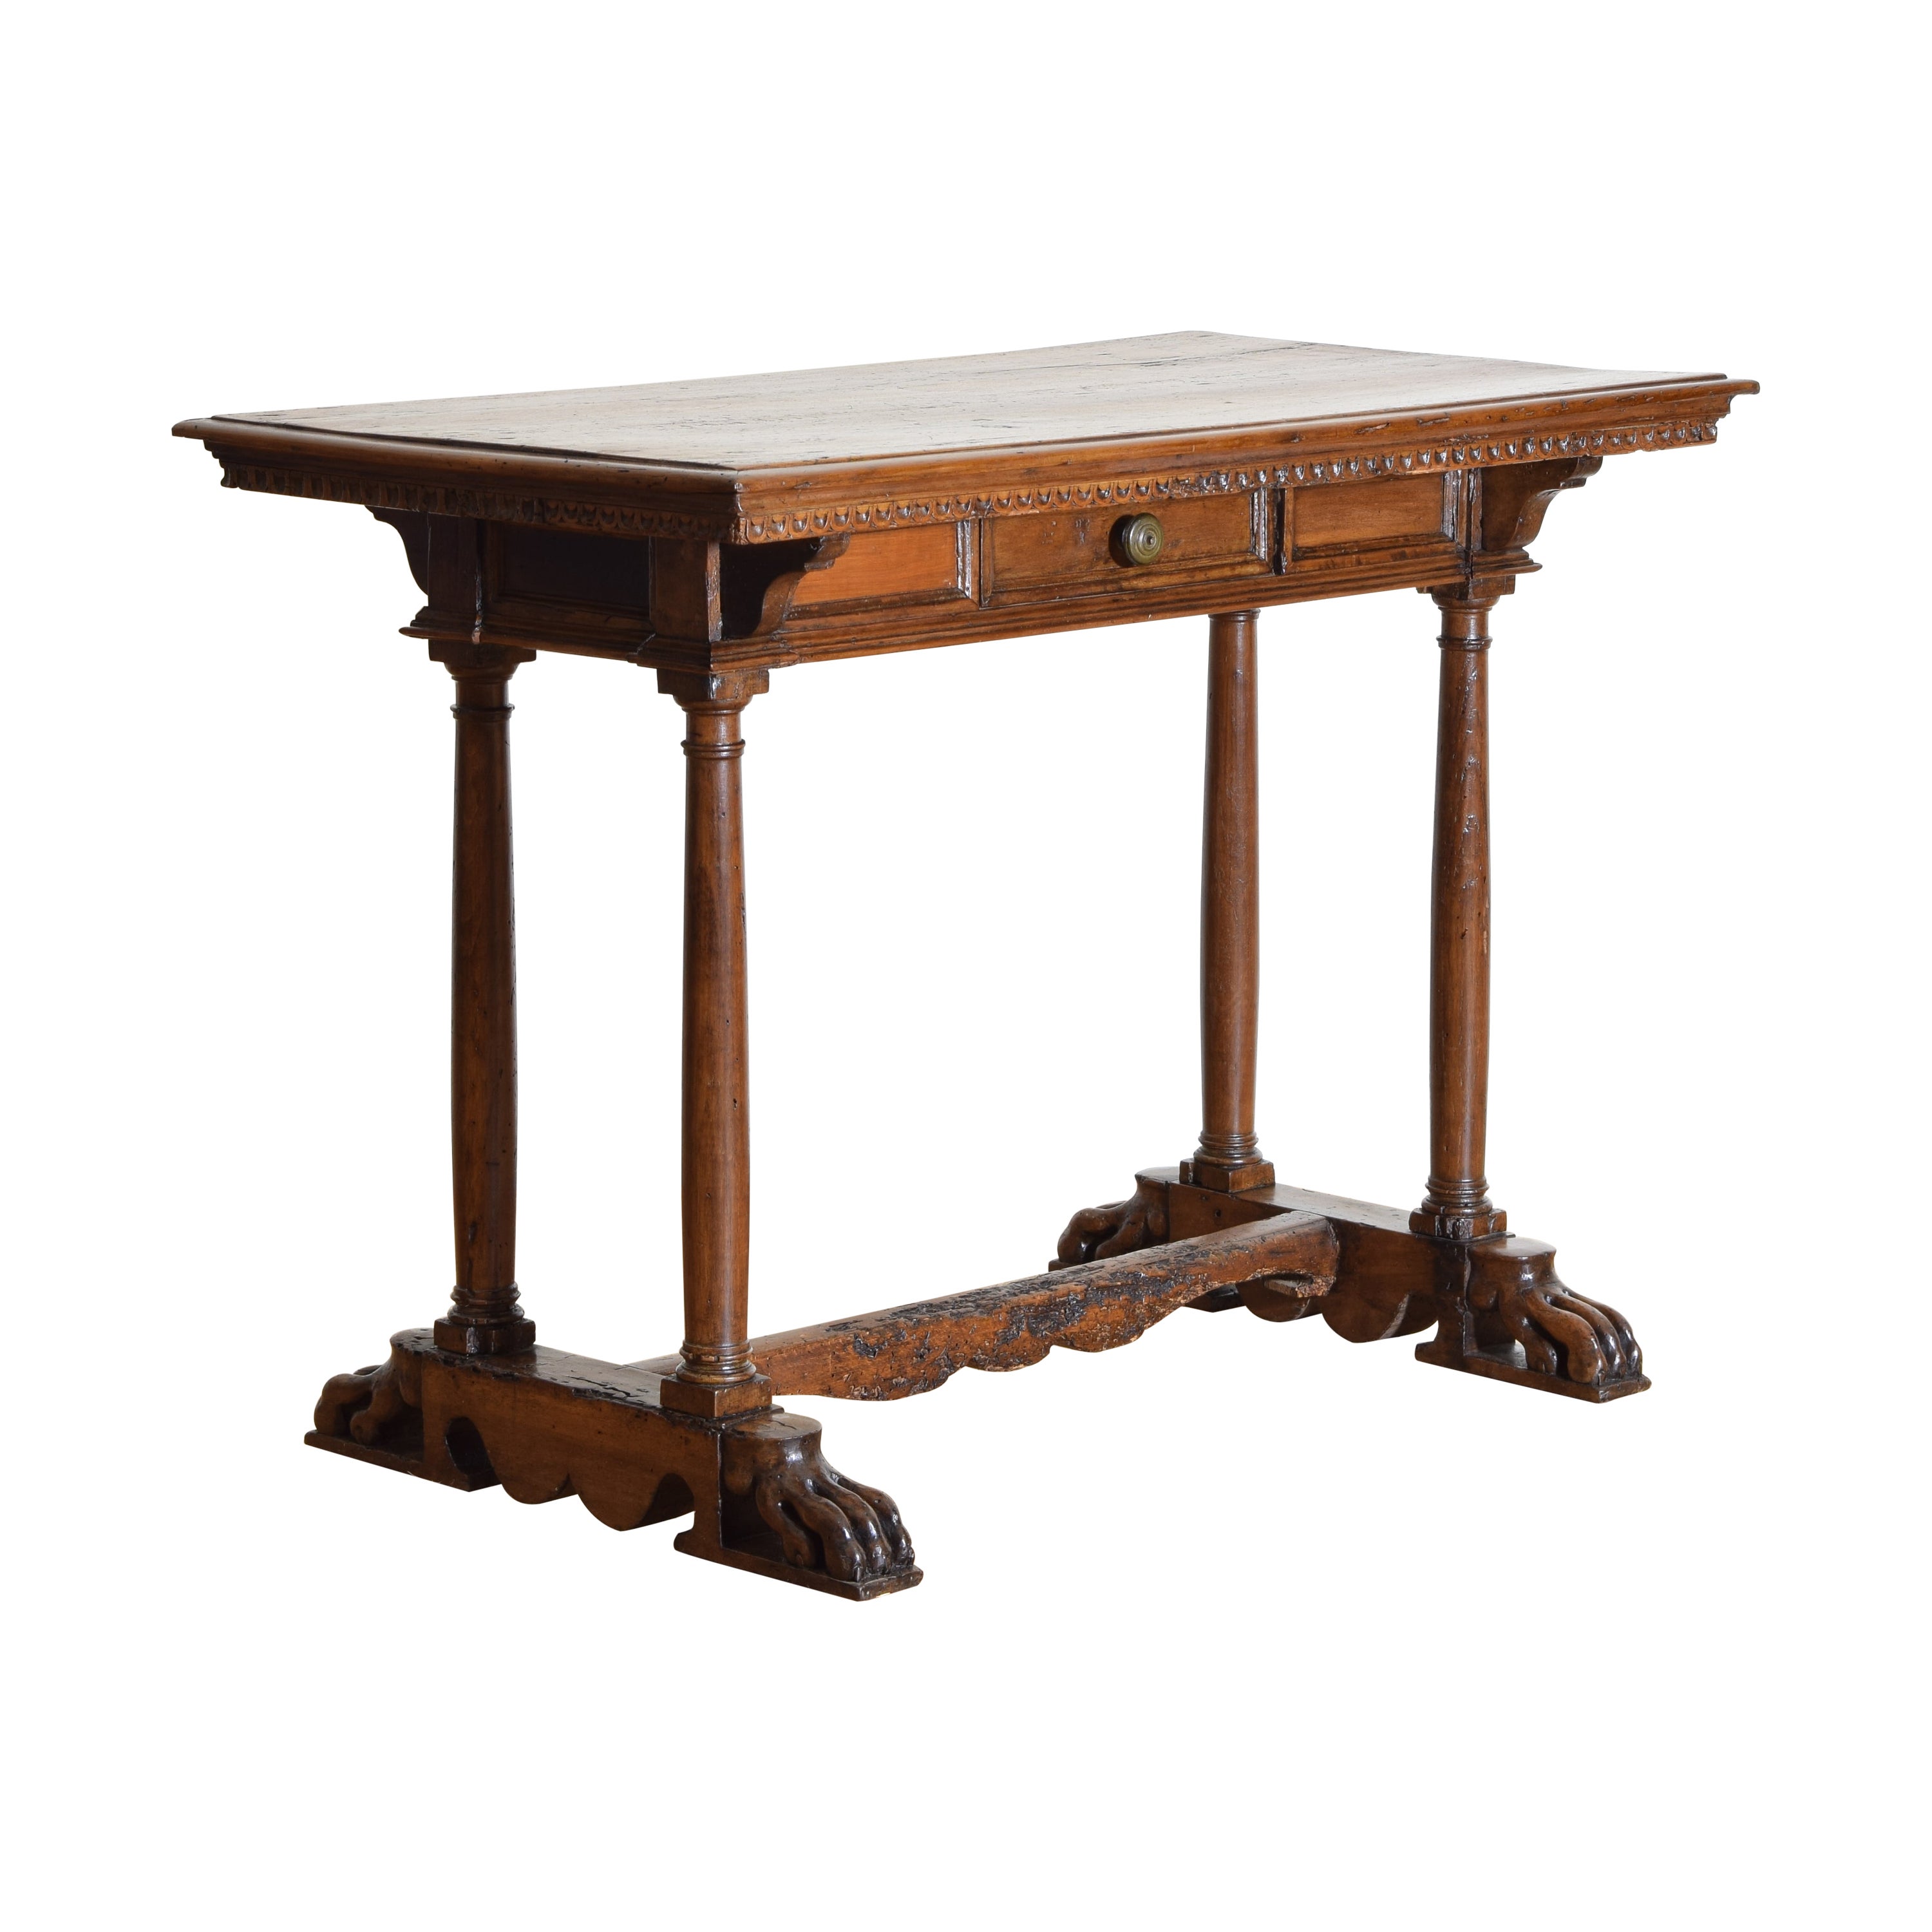 Italian, Tuscany, Baroque Style Carved Walnut 1-Drawer Table, 17th Cen and Later For Sale